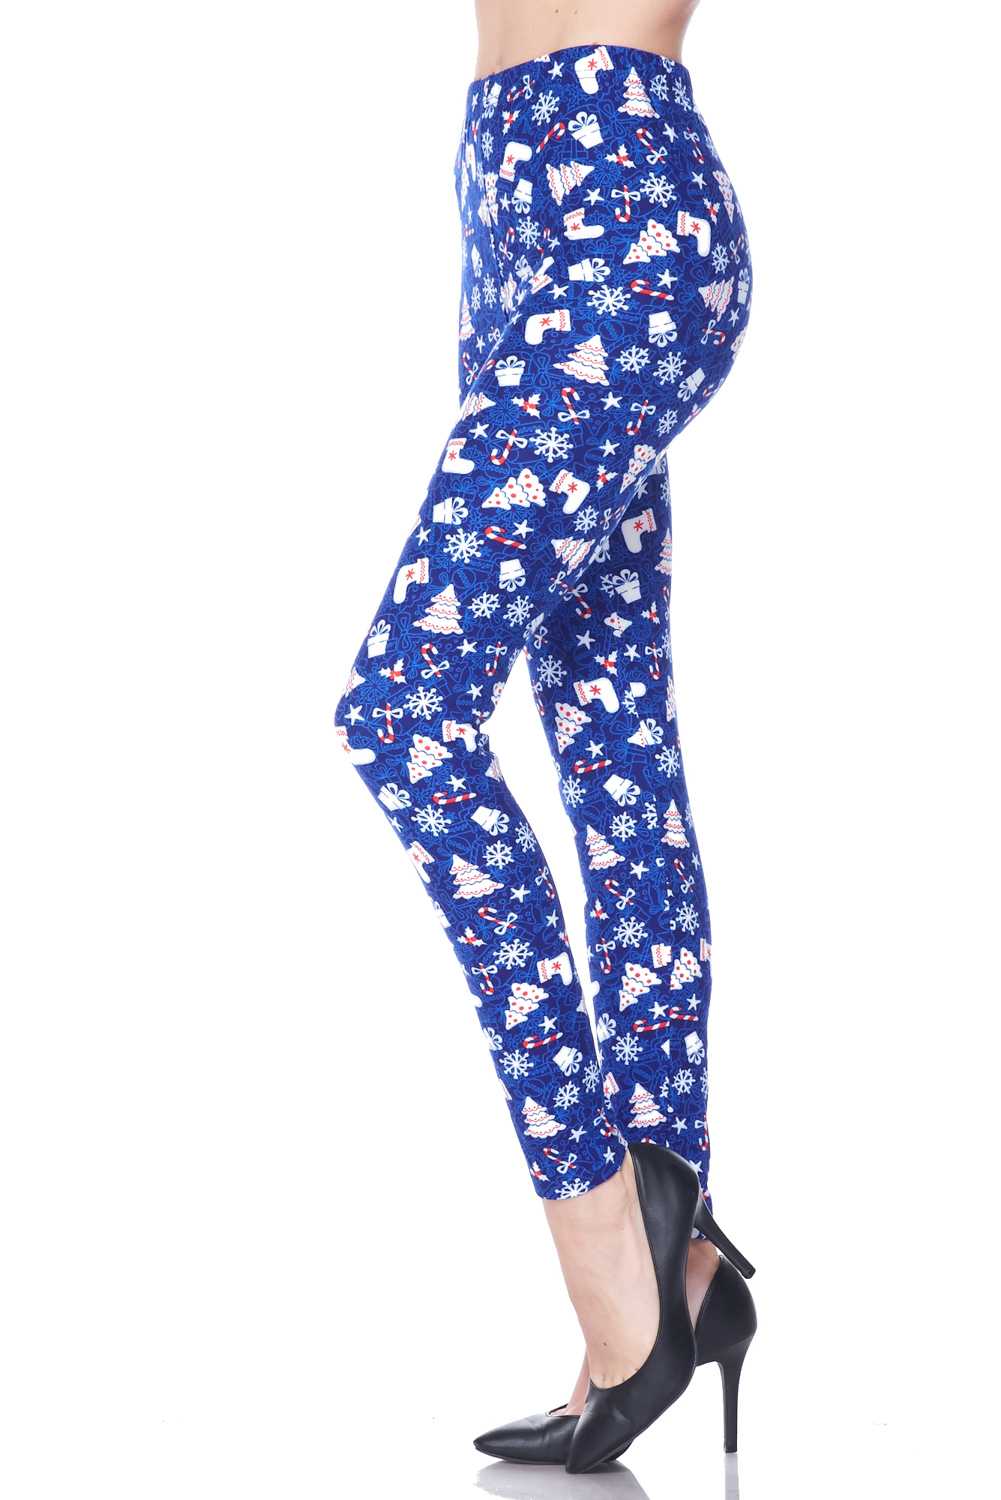 Snow Flakes And Gifts X-Mas Print Brushed Leggings - 3